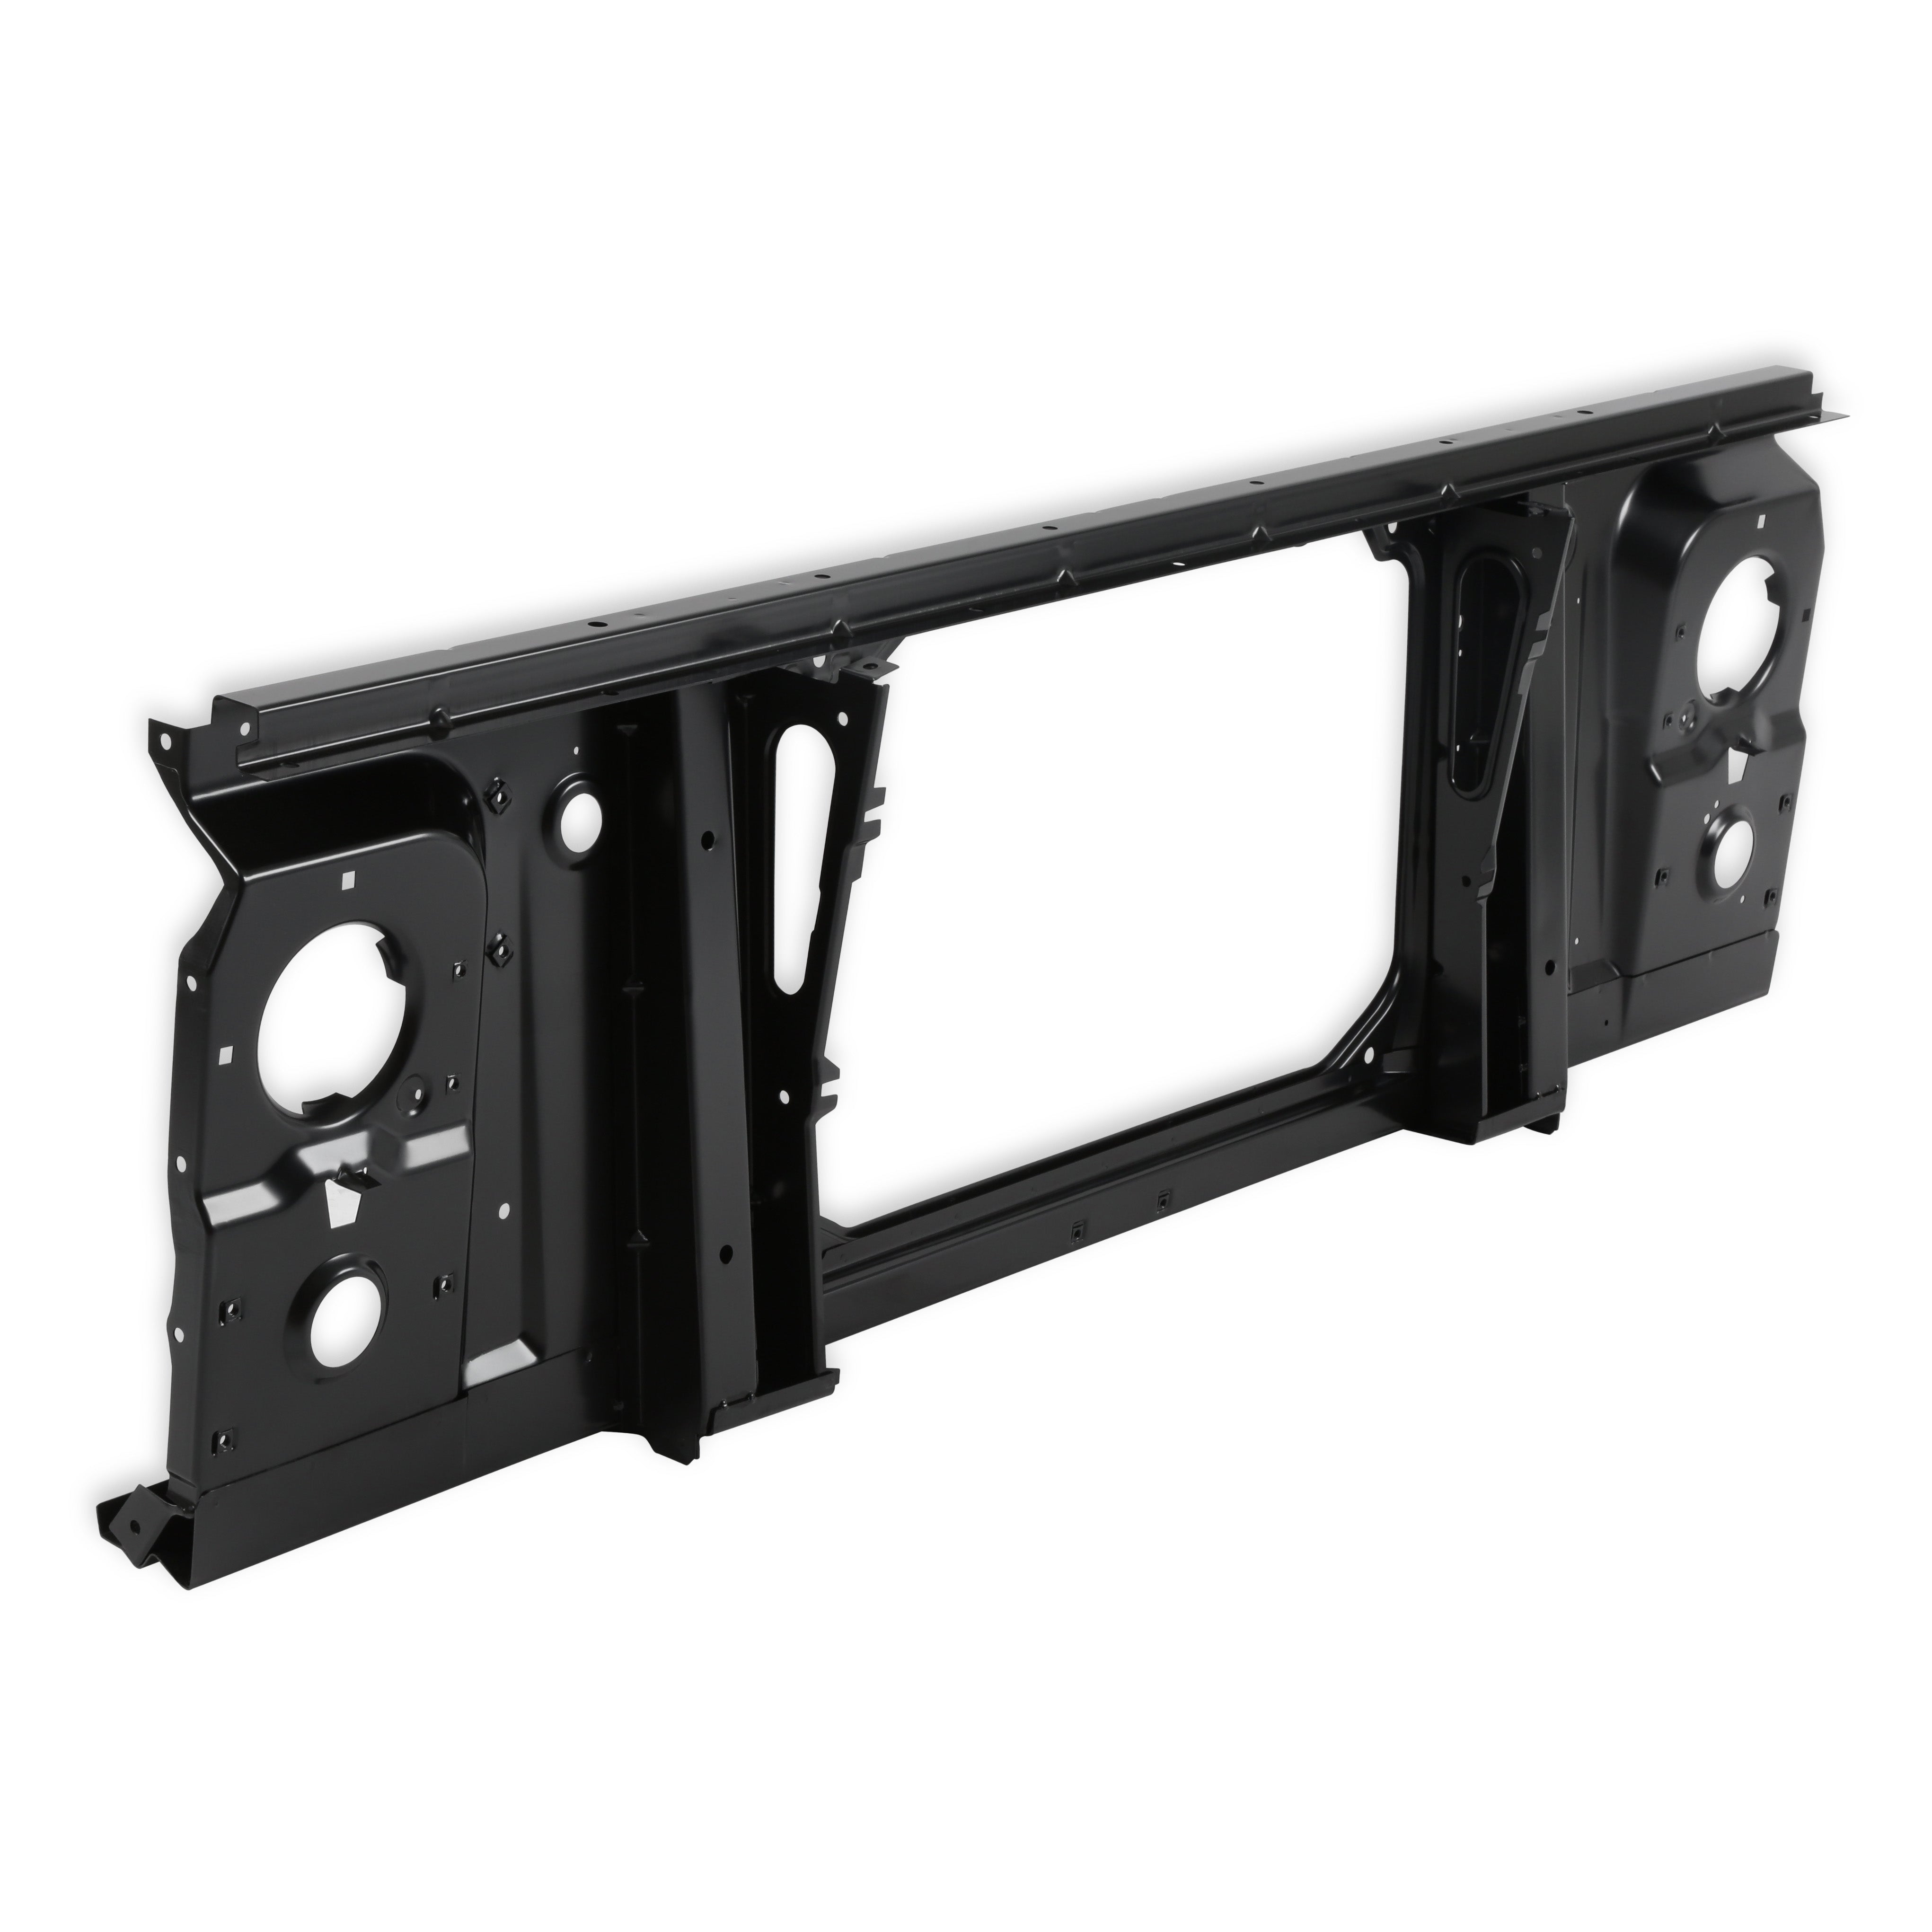 BROTHERS Radiator Support 04-236